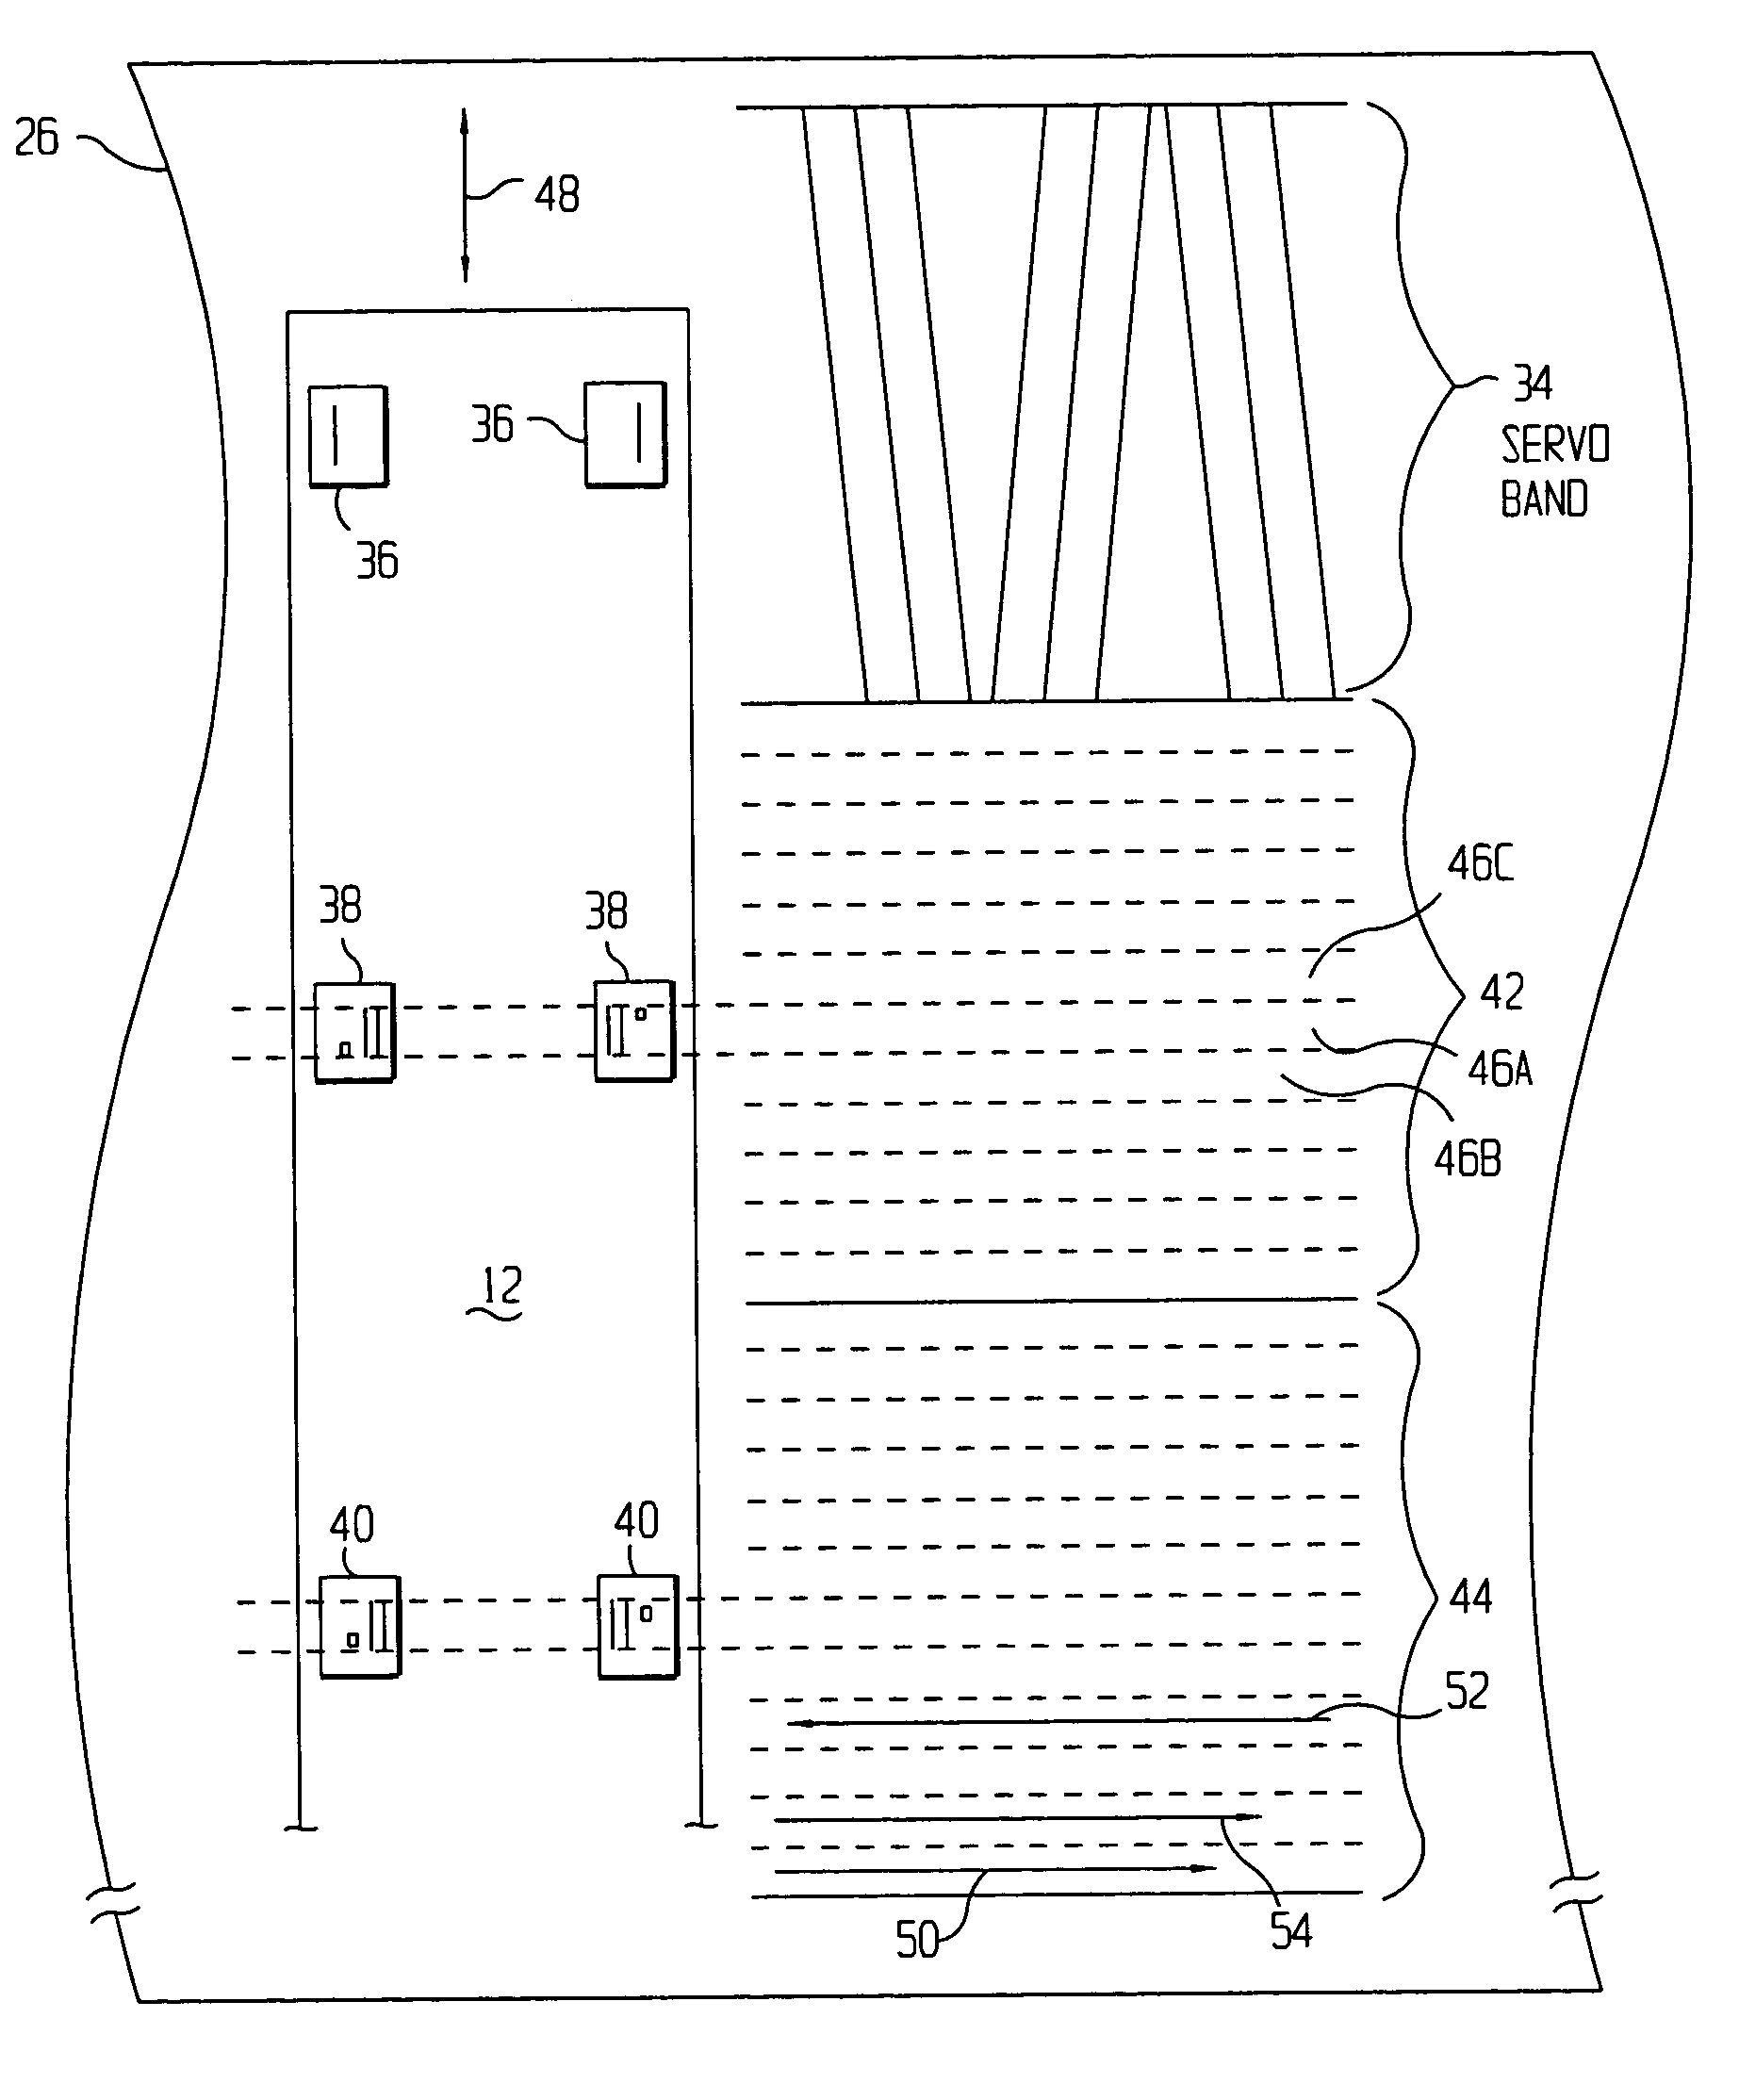 Method and system of a head for a storage media